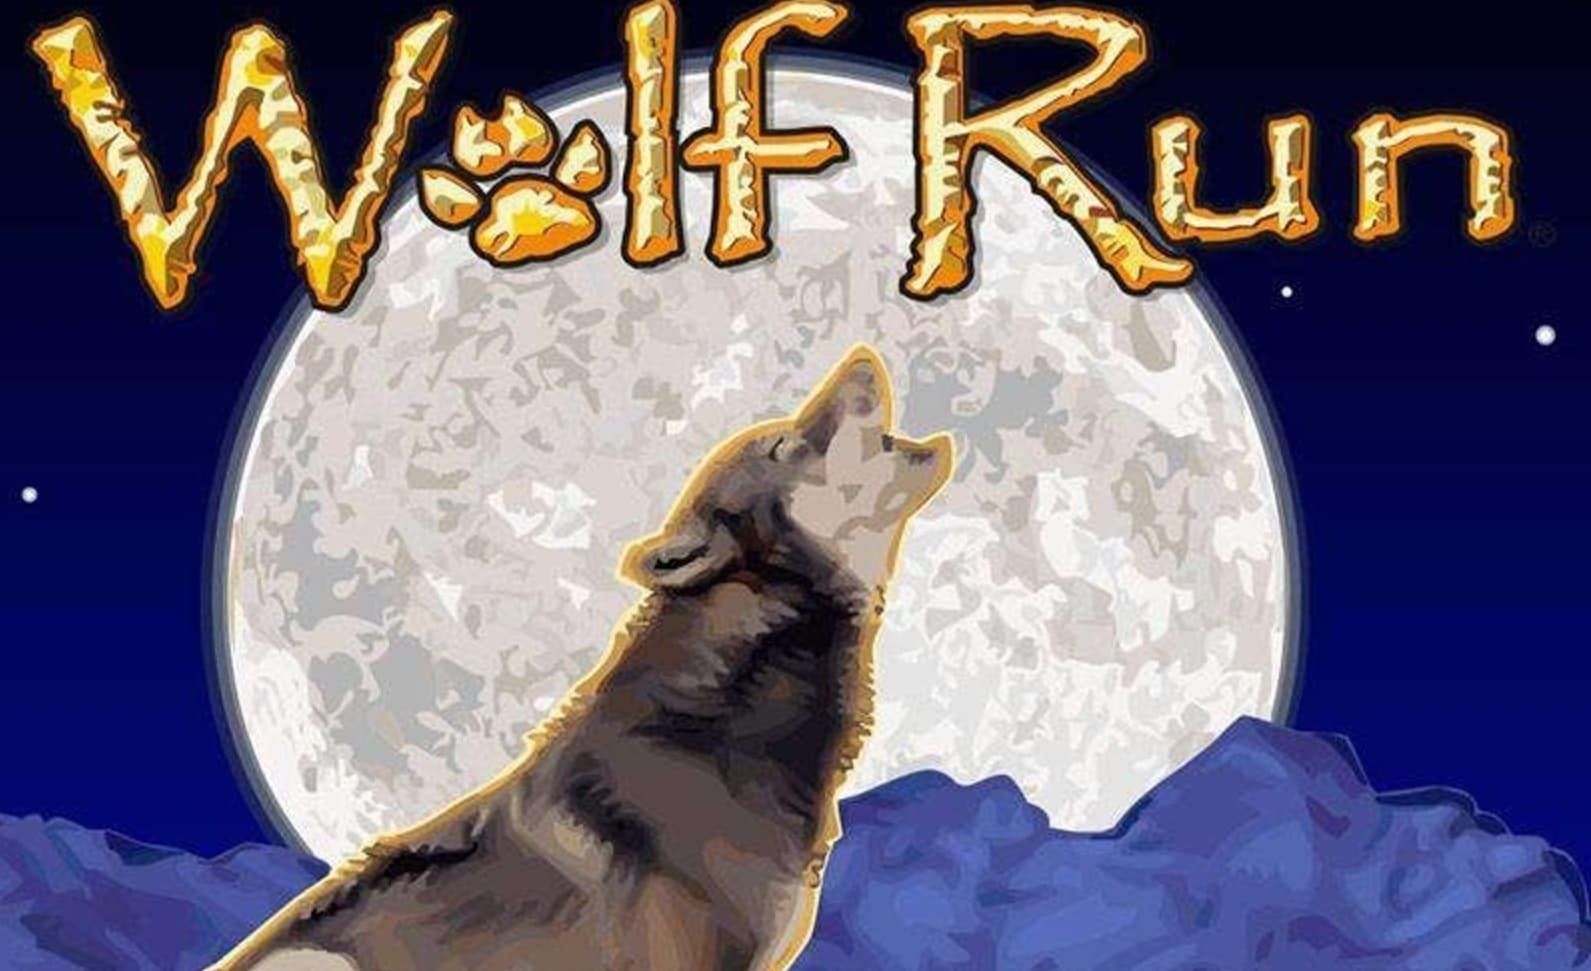 Wolf Run Slot Machine ➪ Play for free in Canada